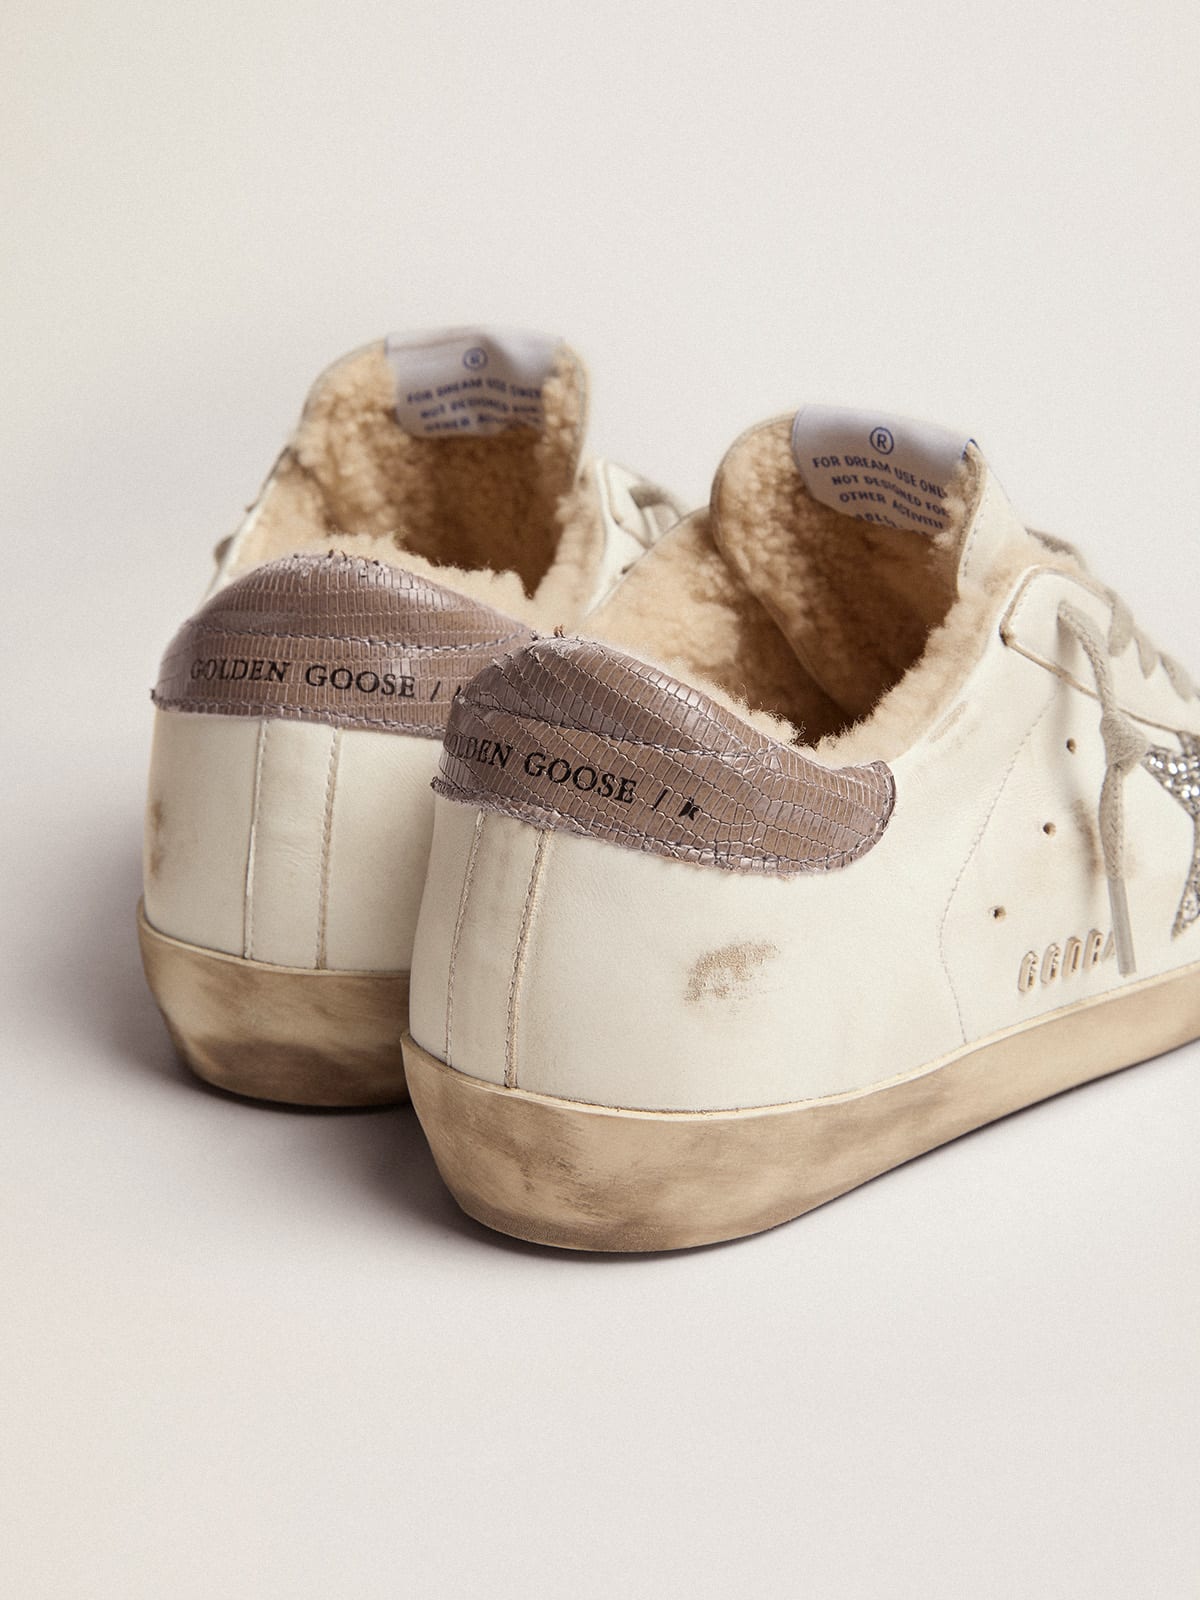 Golden Goose - Super-Star sneakers with shearling lining, silver glitter star and lizard-print dove-gray leather heel tab in 